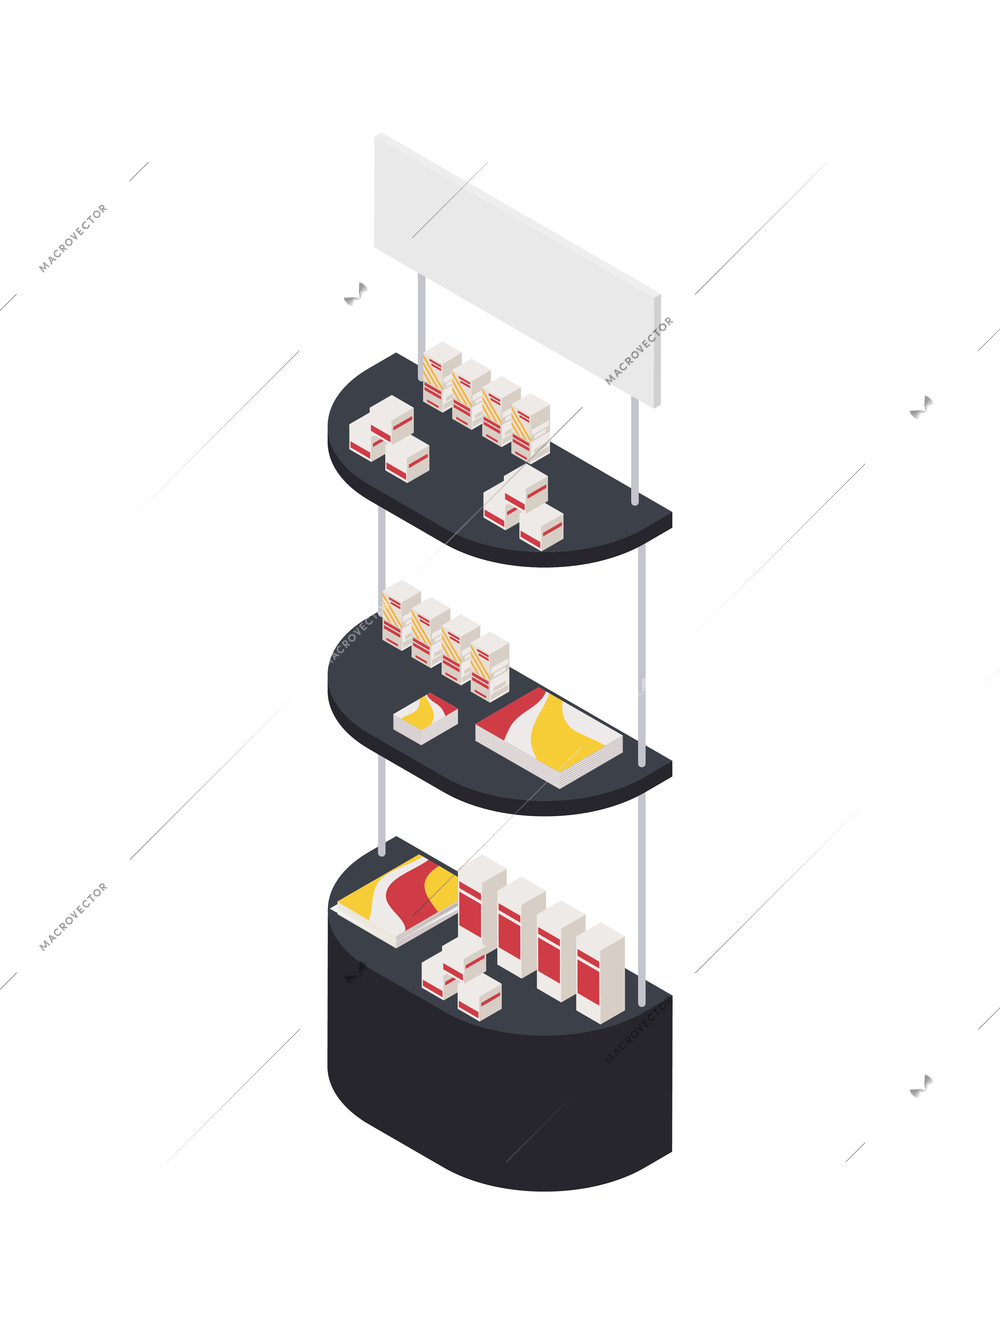 Isometric promotion stand with products and brochures on shelves for exhibition interior 3d vector illustration